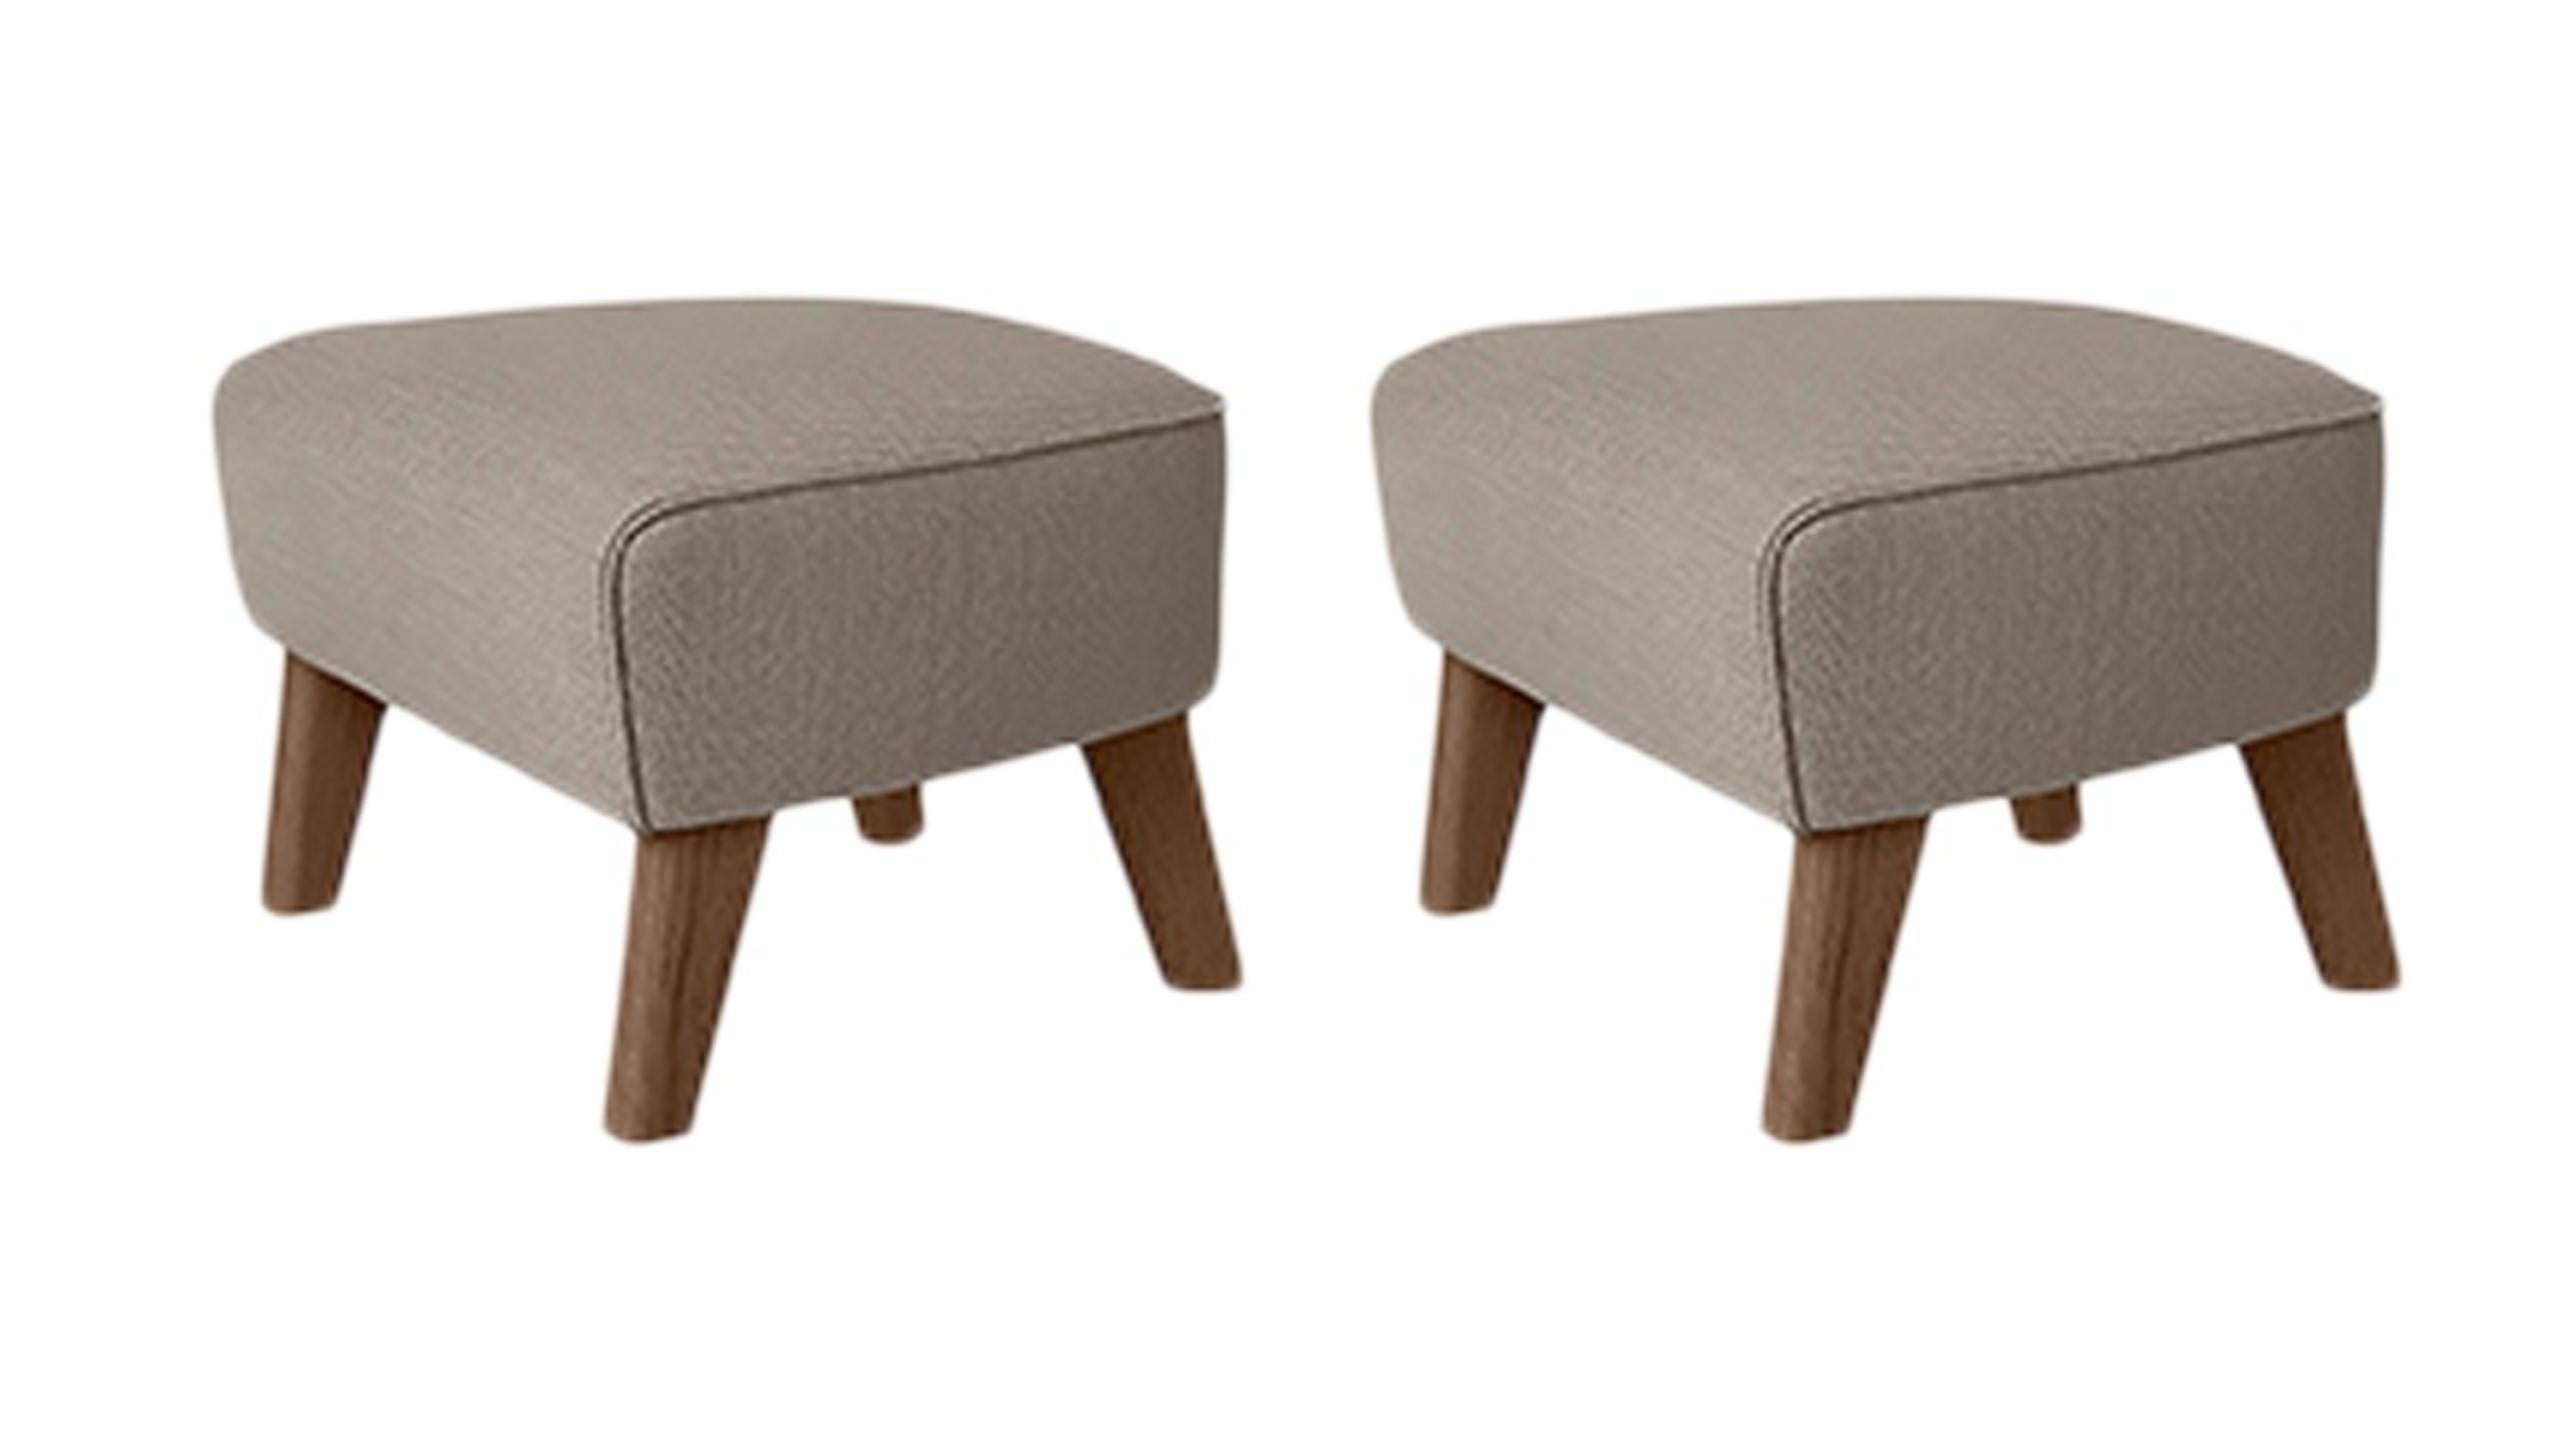 Set of 2 light beige,smoked oak raf simons vidar 3 my own chair footstool by Lassen.
Dimensions: W 56 x D 58 x H 40 cm 
Materials: Textile
Also available: Other colors available,

The My Own Chair Footstool has been designed in the same spirit